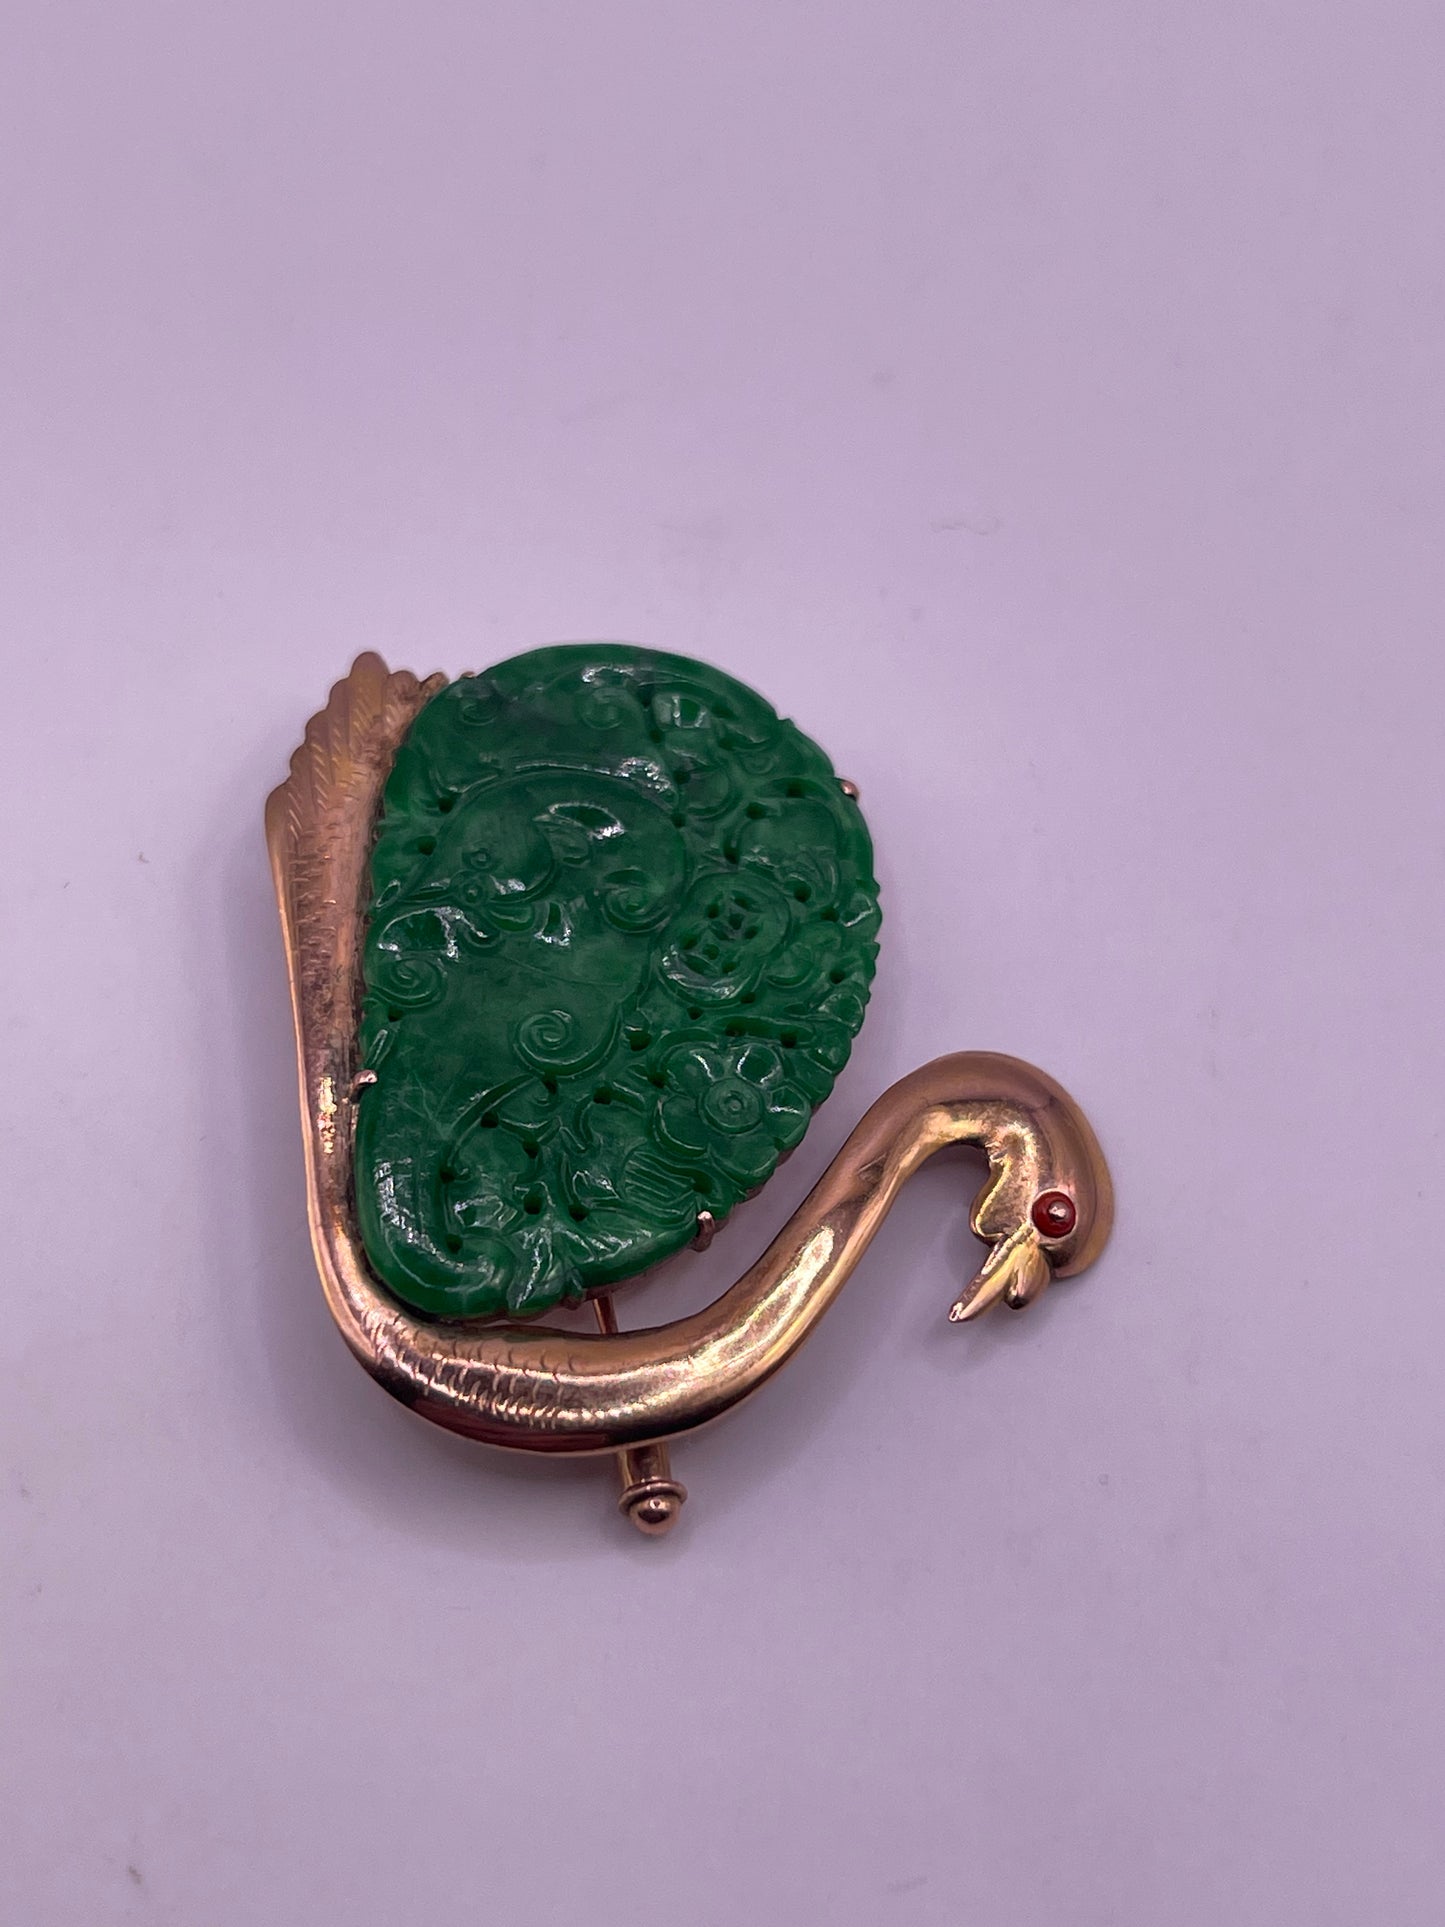 A jade plaque pin in a gold setting